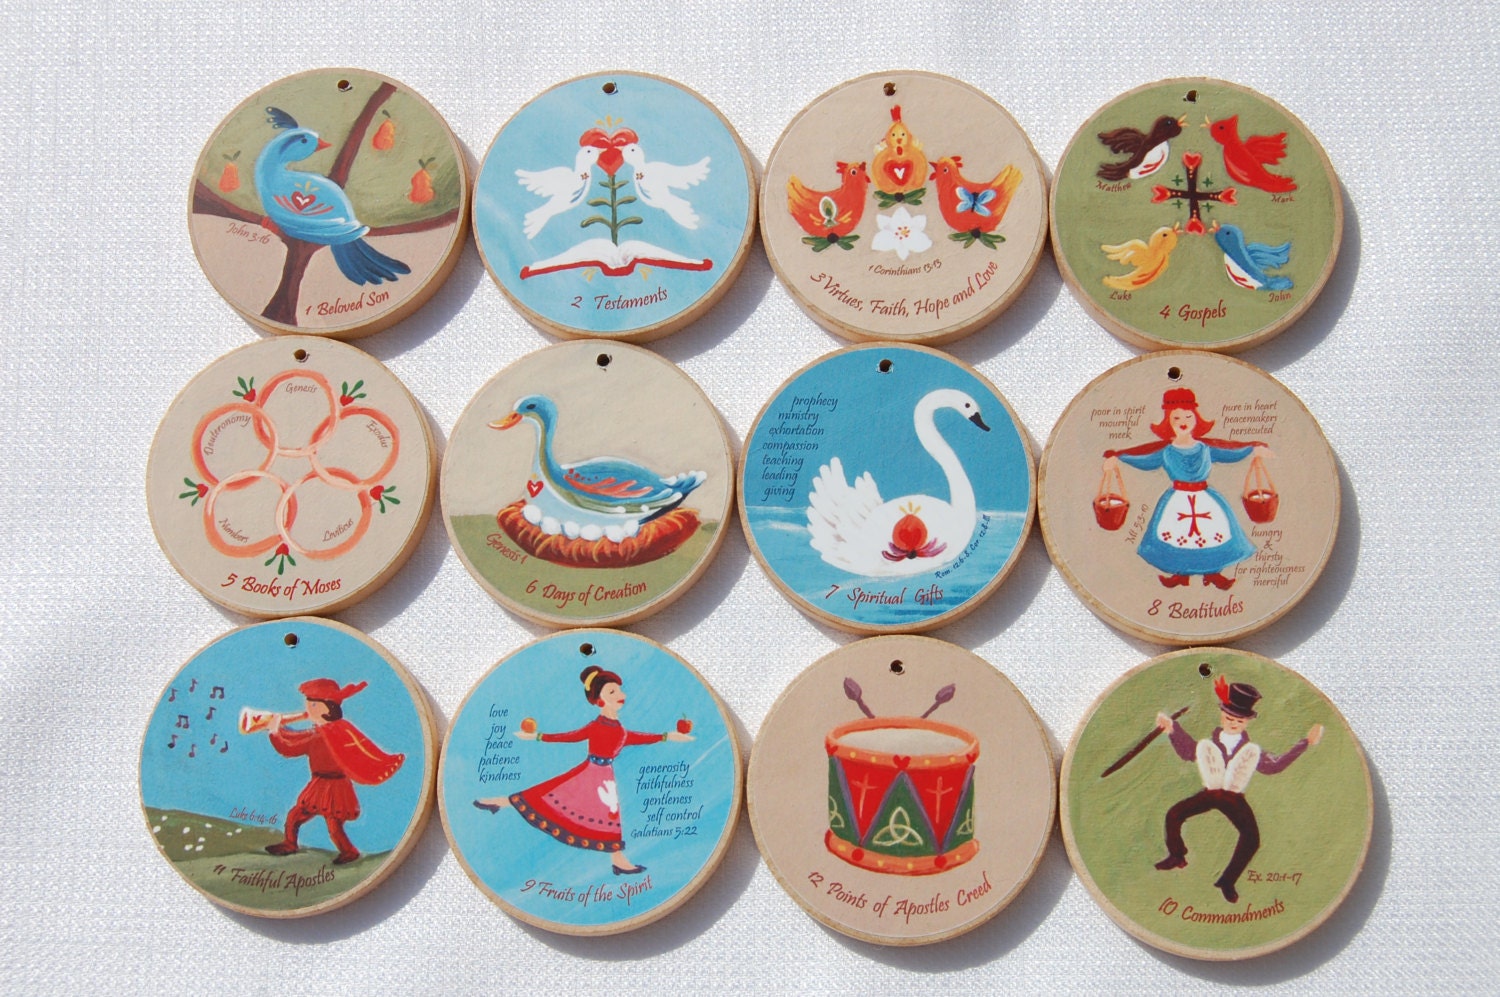 12 Days of CHRISTmas Ornaments for Advent and Christmas